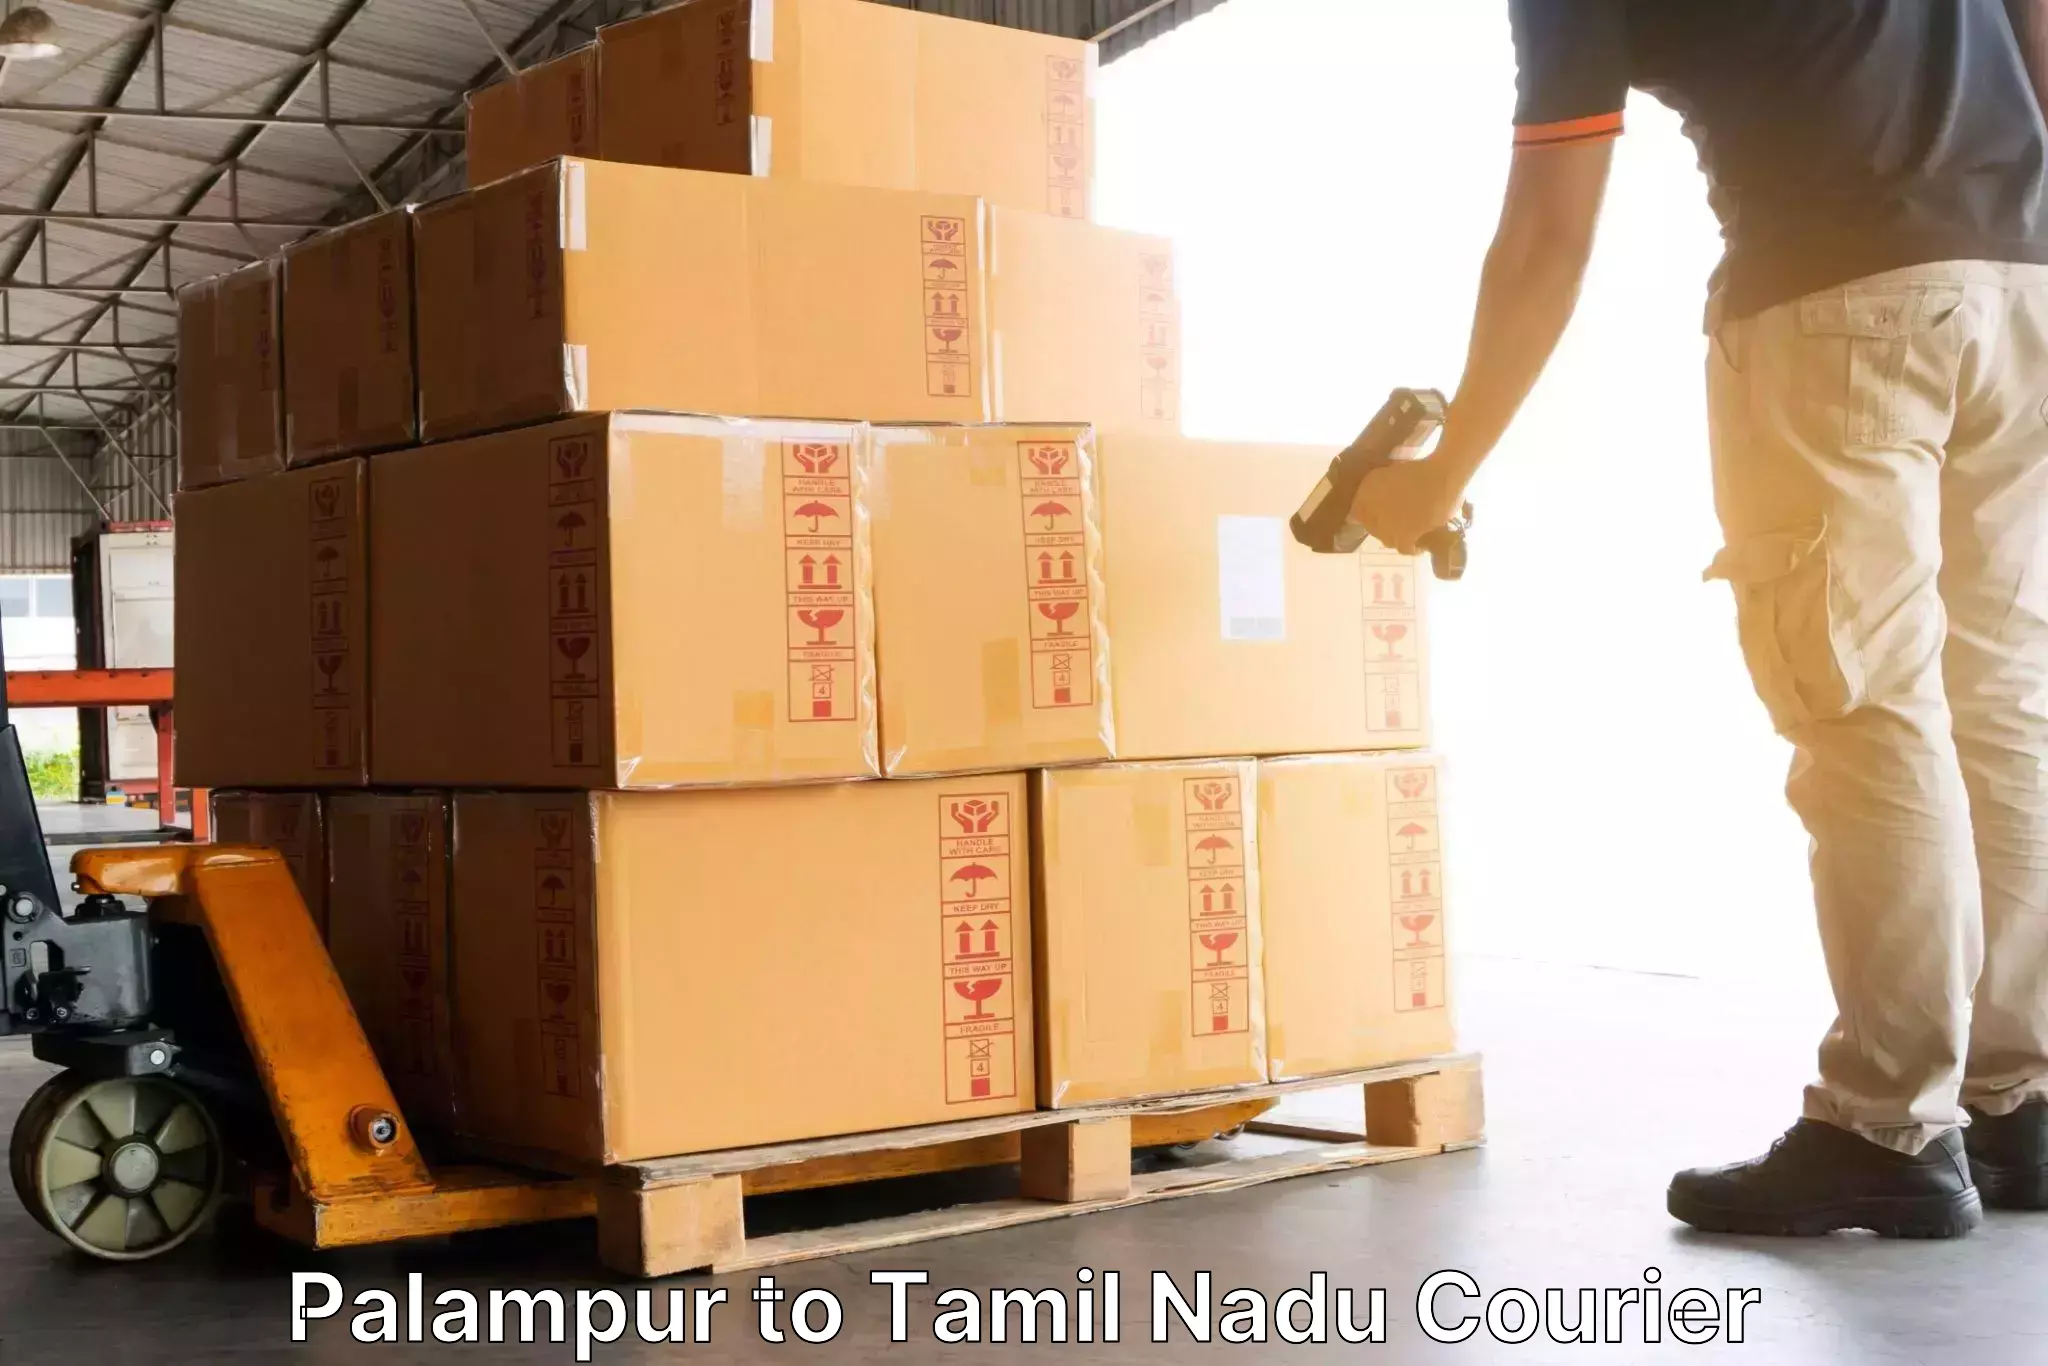 Advanced delivery network Palampur to Chennai Port